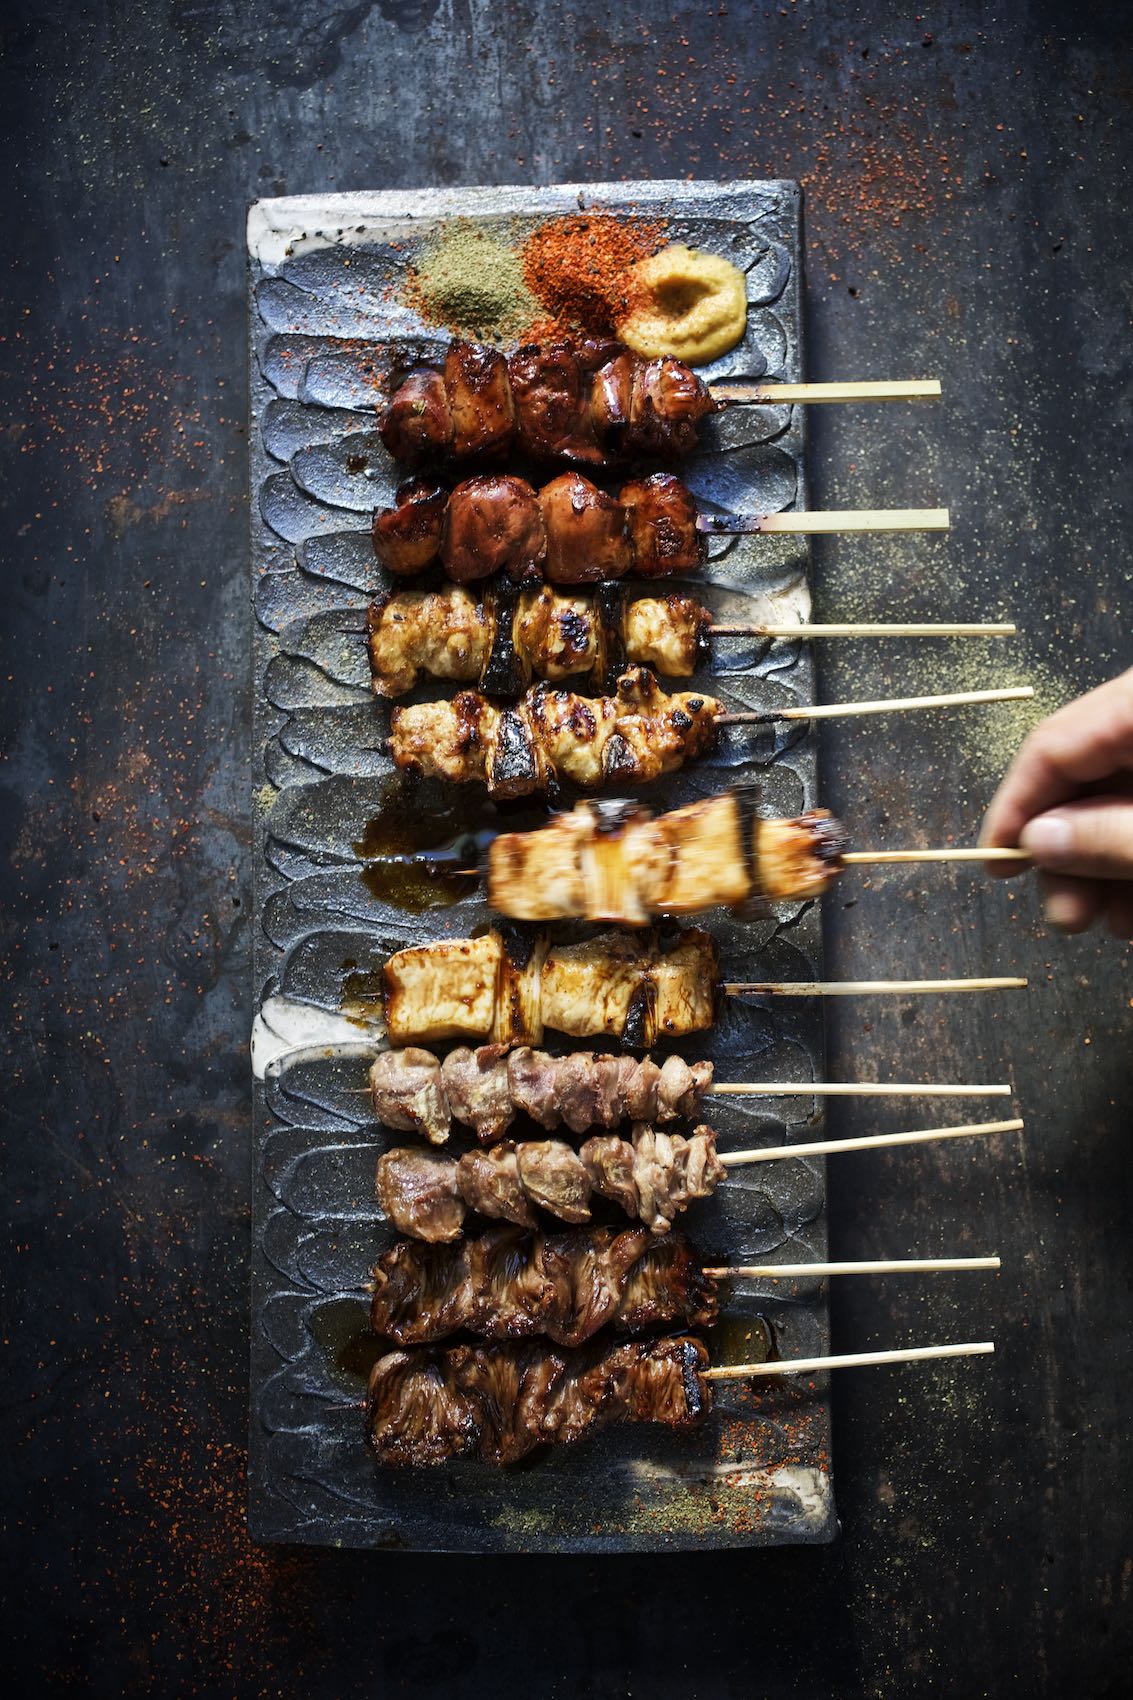 Jody Horton Photography - Assorted kebabs presented on stone slab with colorful spices. 